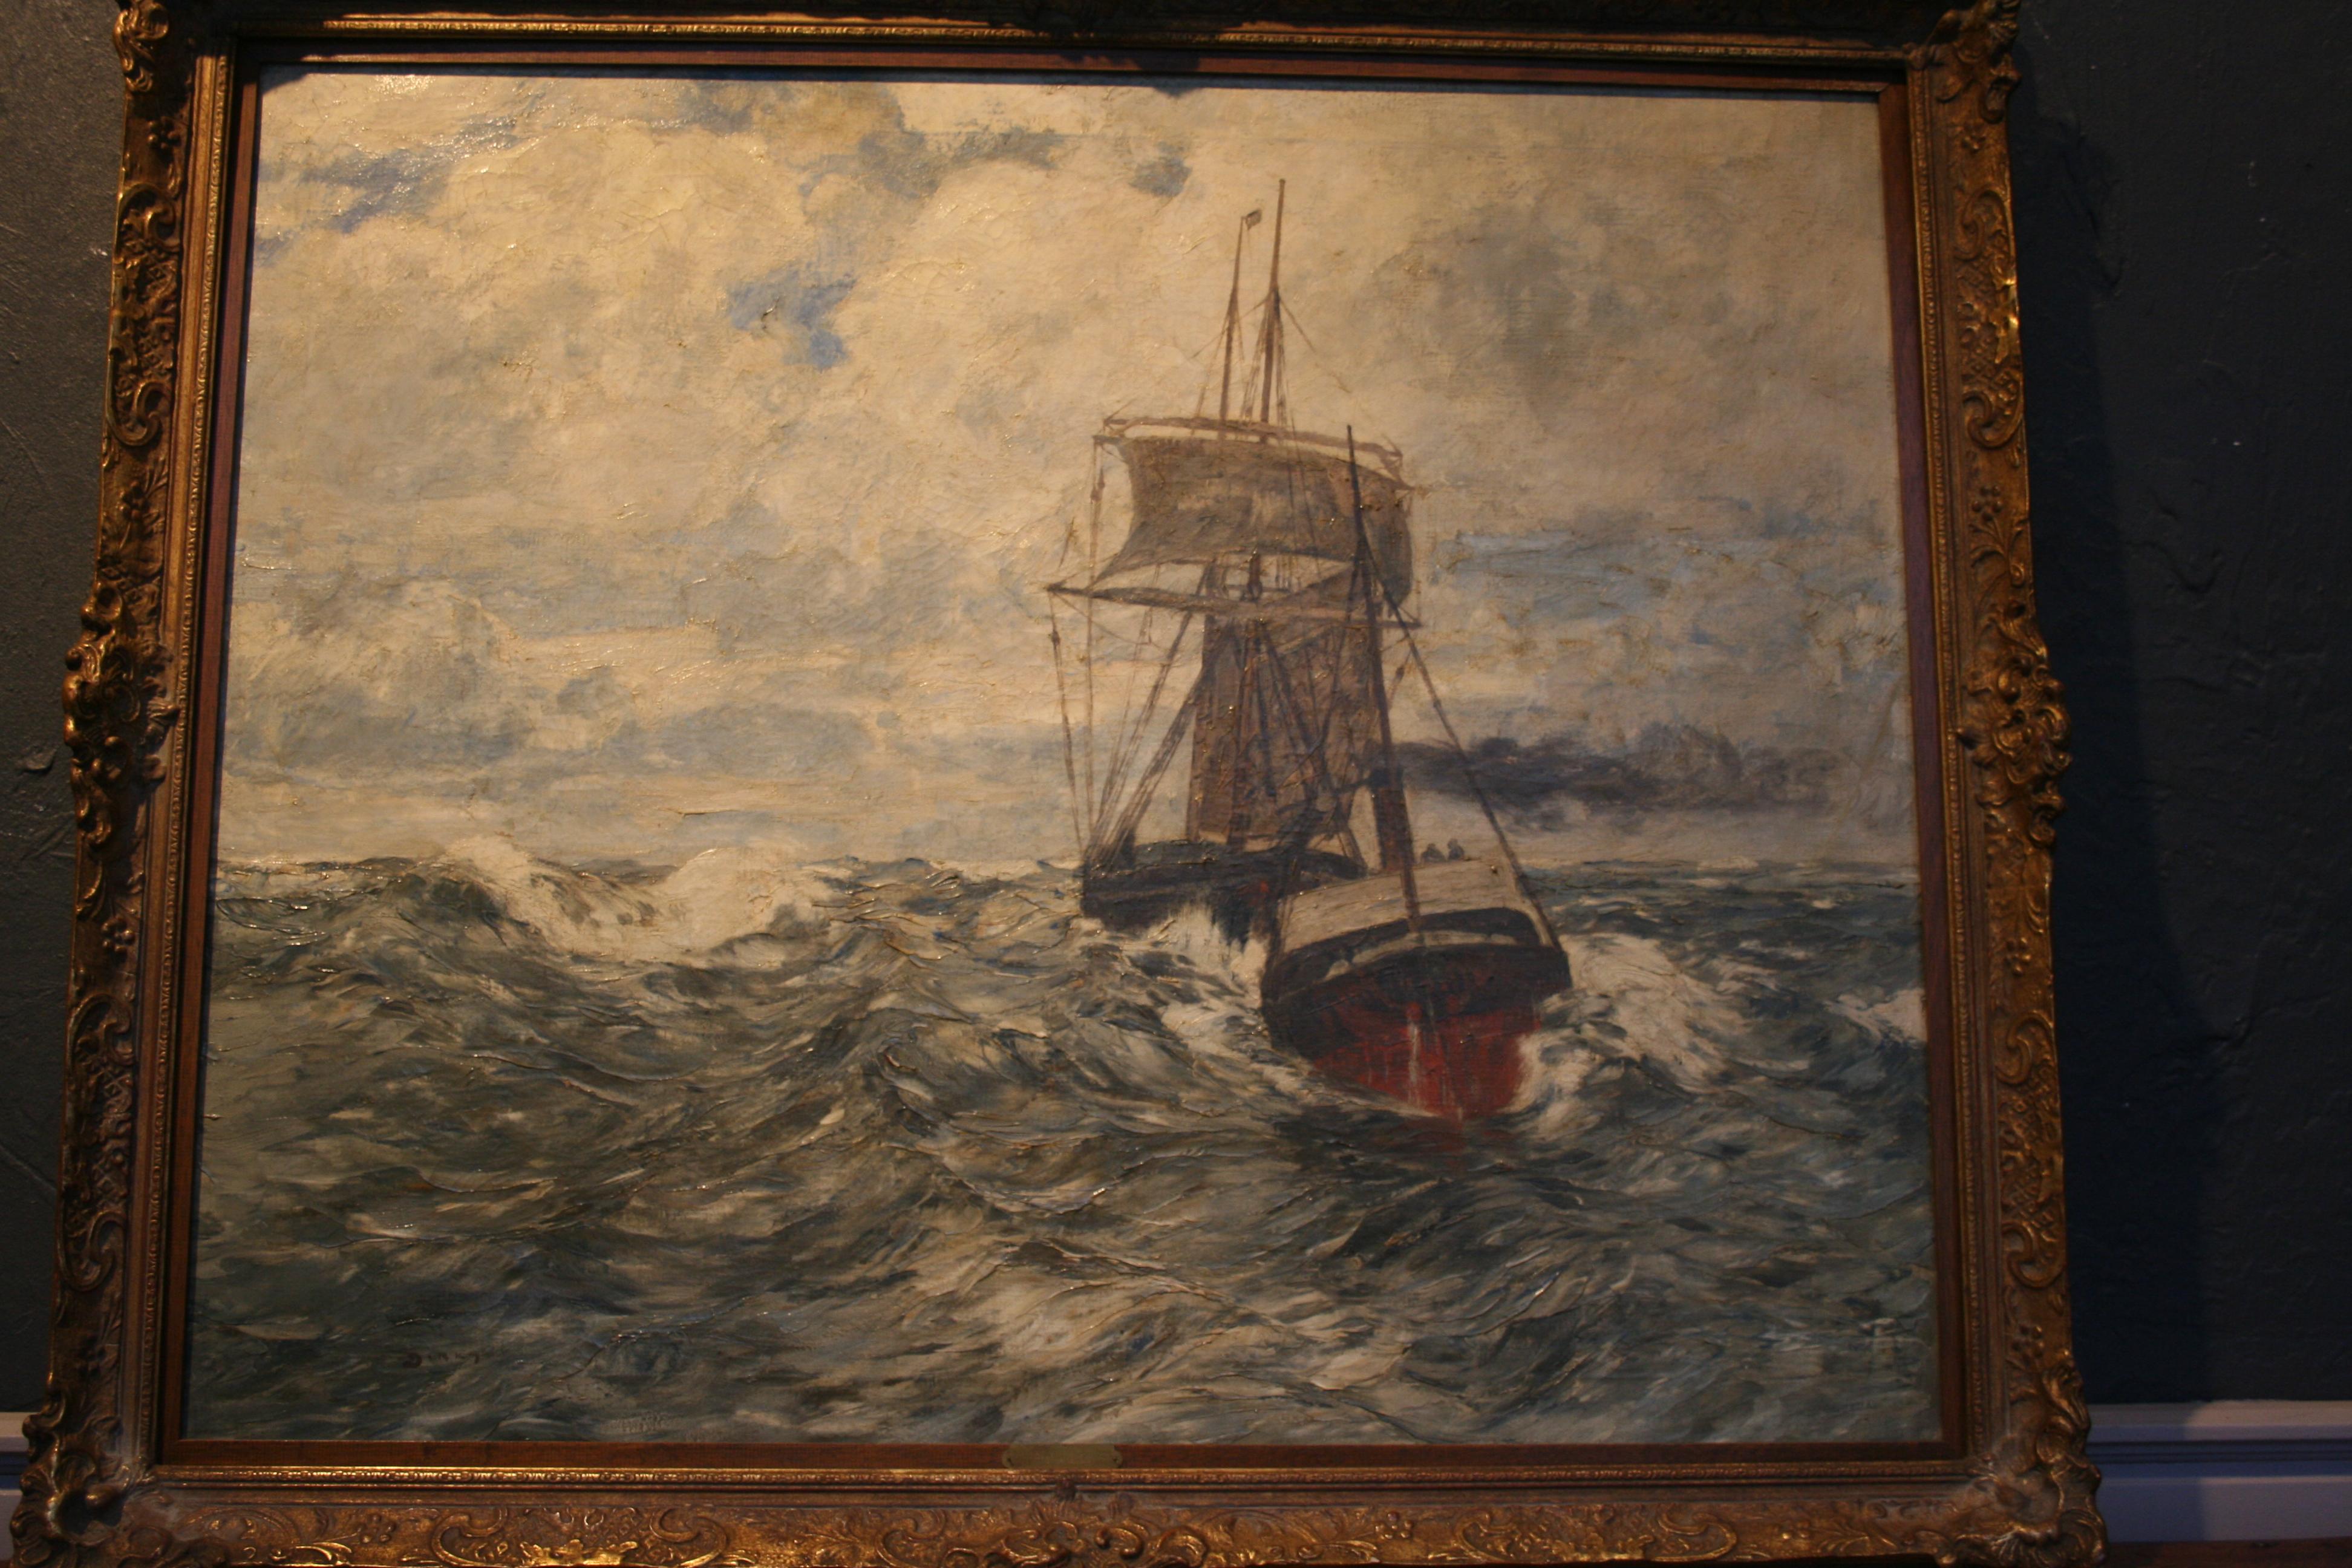 Painting Oil on Canvas, Fishing Boats On The High Seas, by Andreas Dirks 2